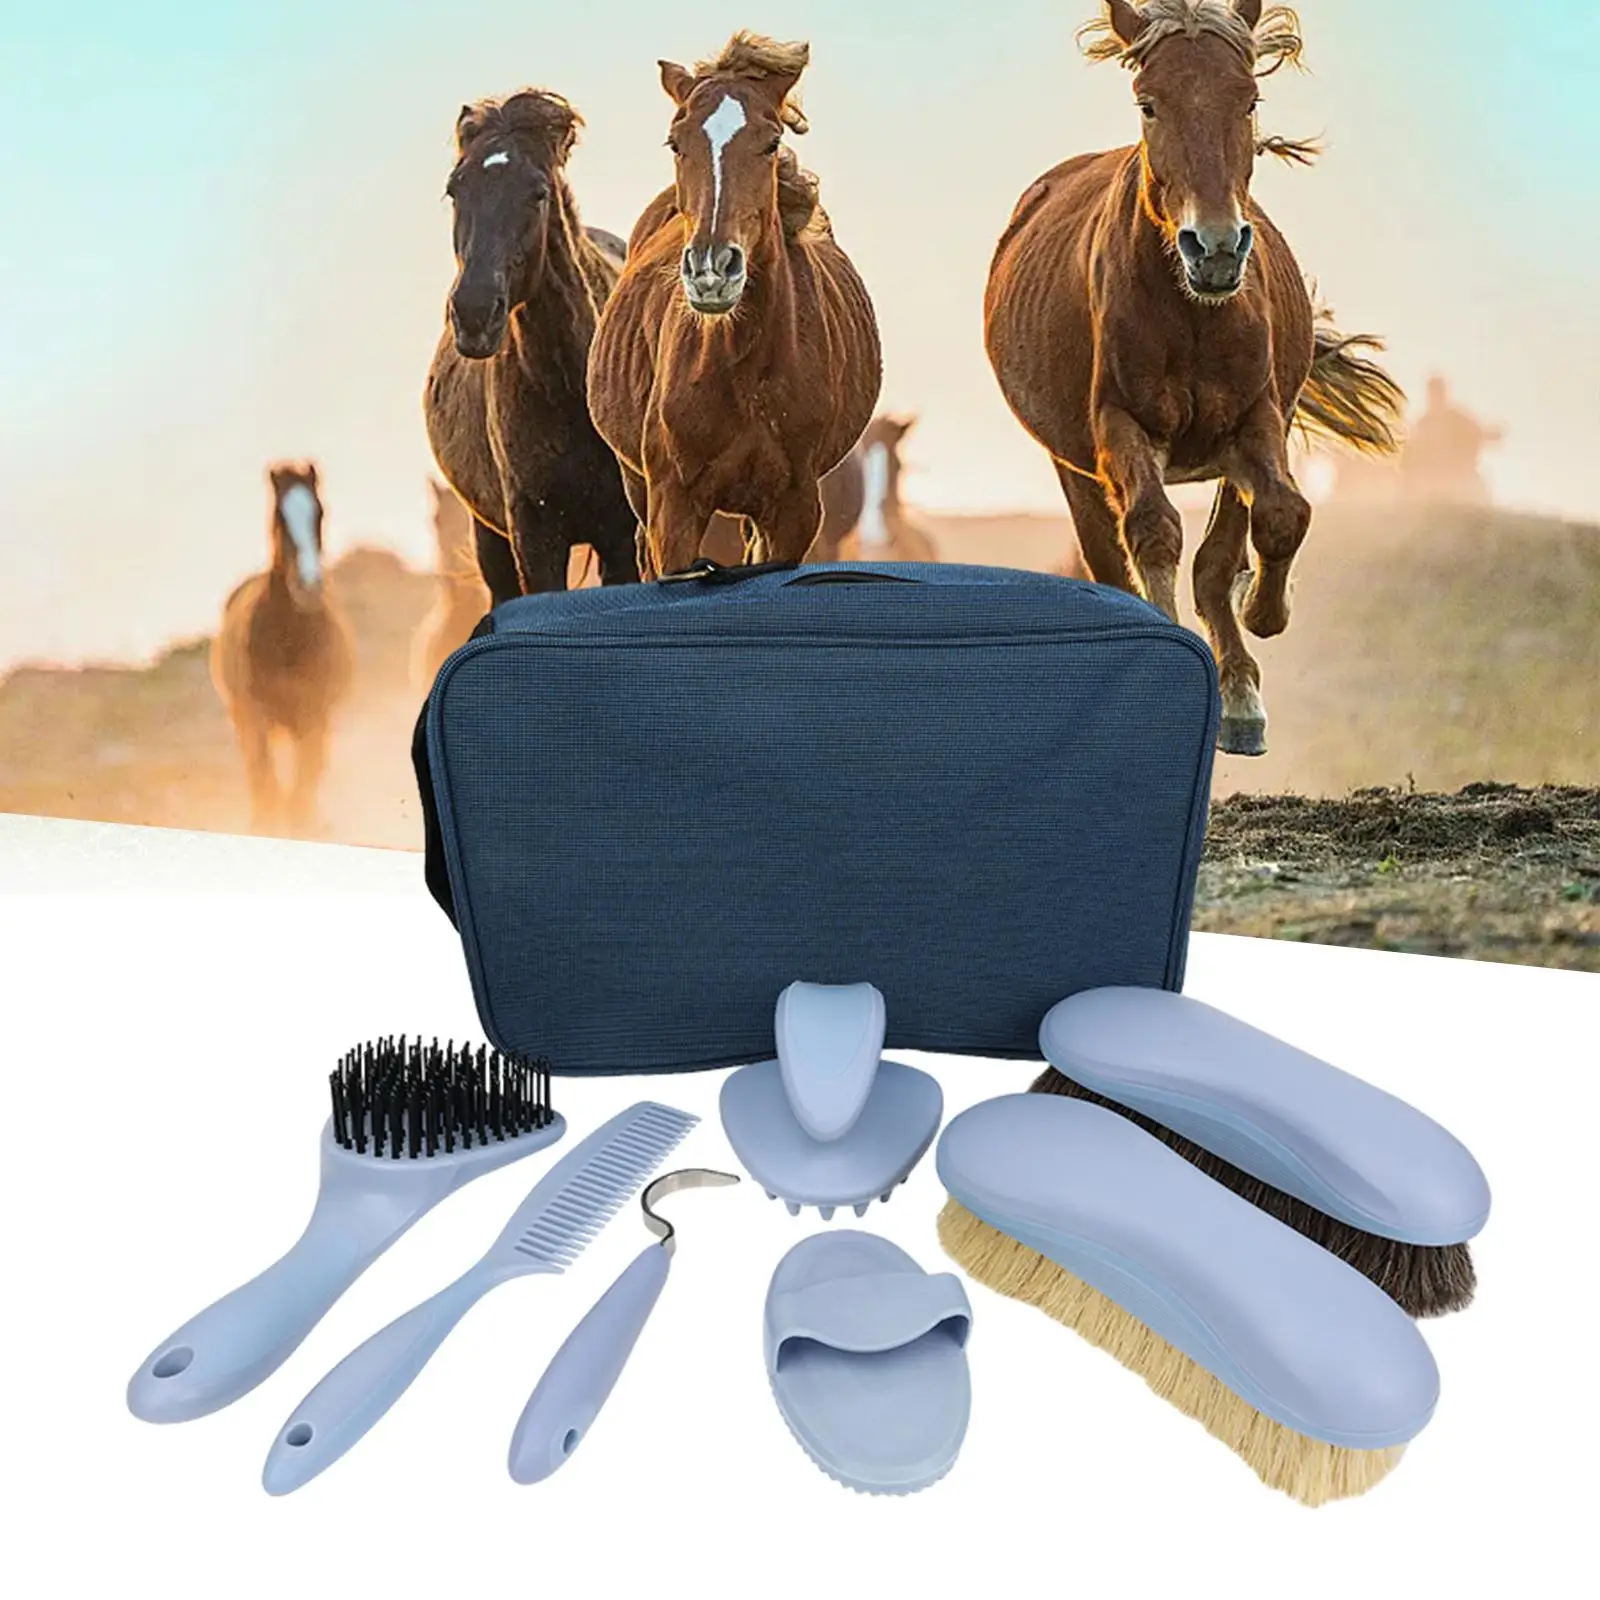 8x-horse-grooming-care-kit-horse-bathing-supplies-riding-equipment-maintenance-set-horse-cleaning-brushes-for-beginners